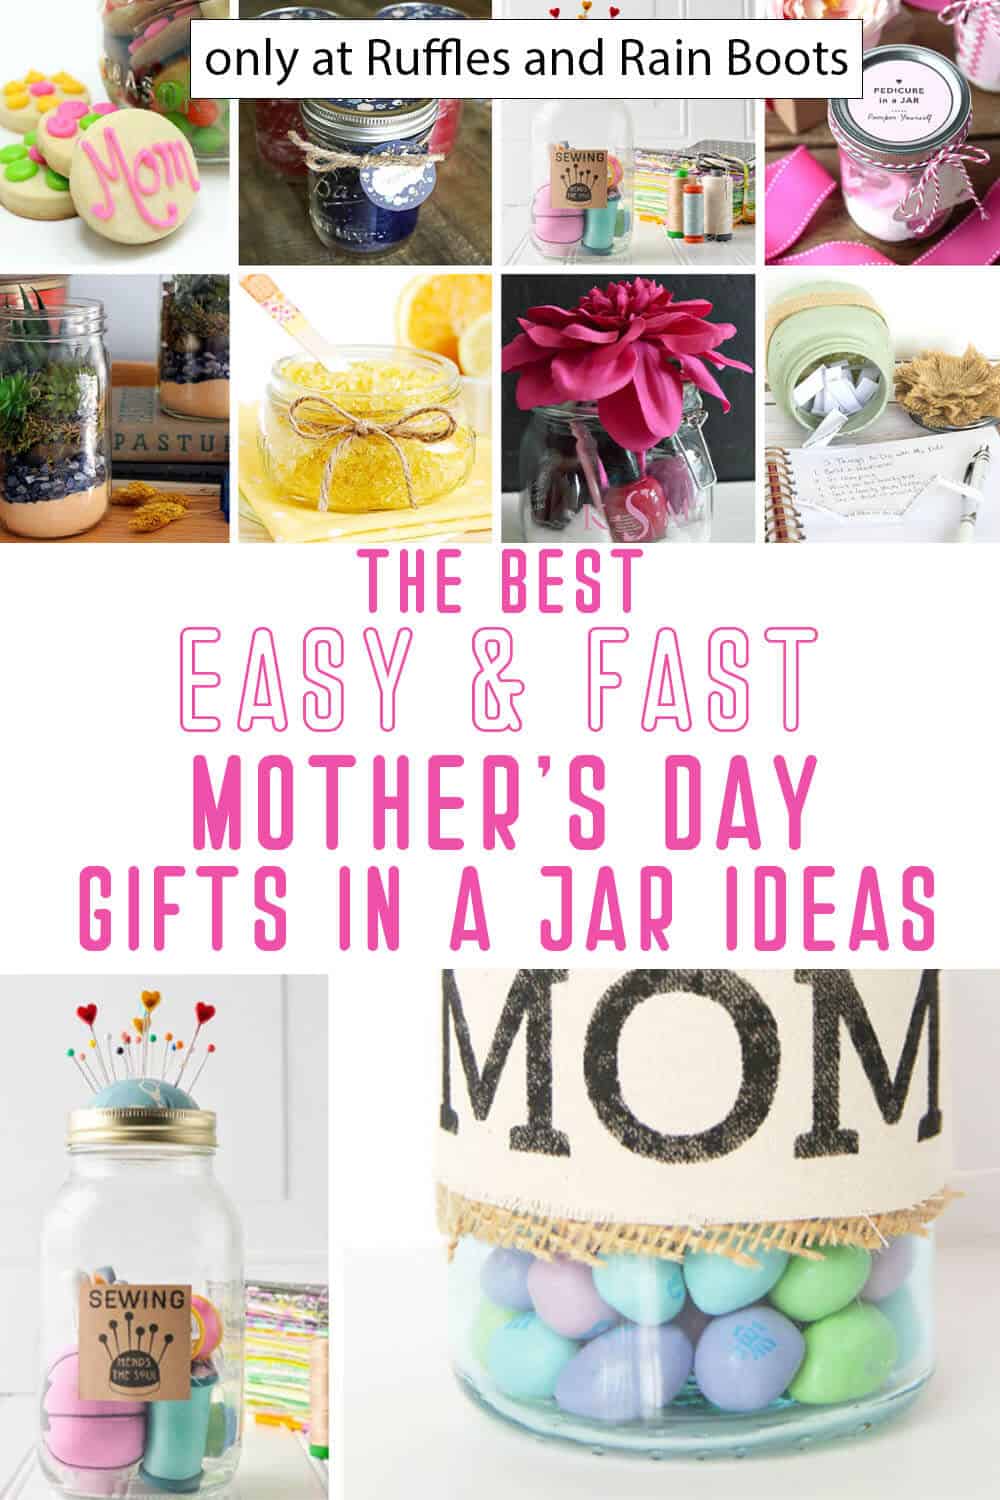 photo collage of mason jar gift ideas for mom with text which reads the best easy & fast mother's day gifts in a jar ideas